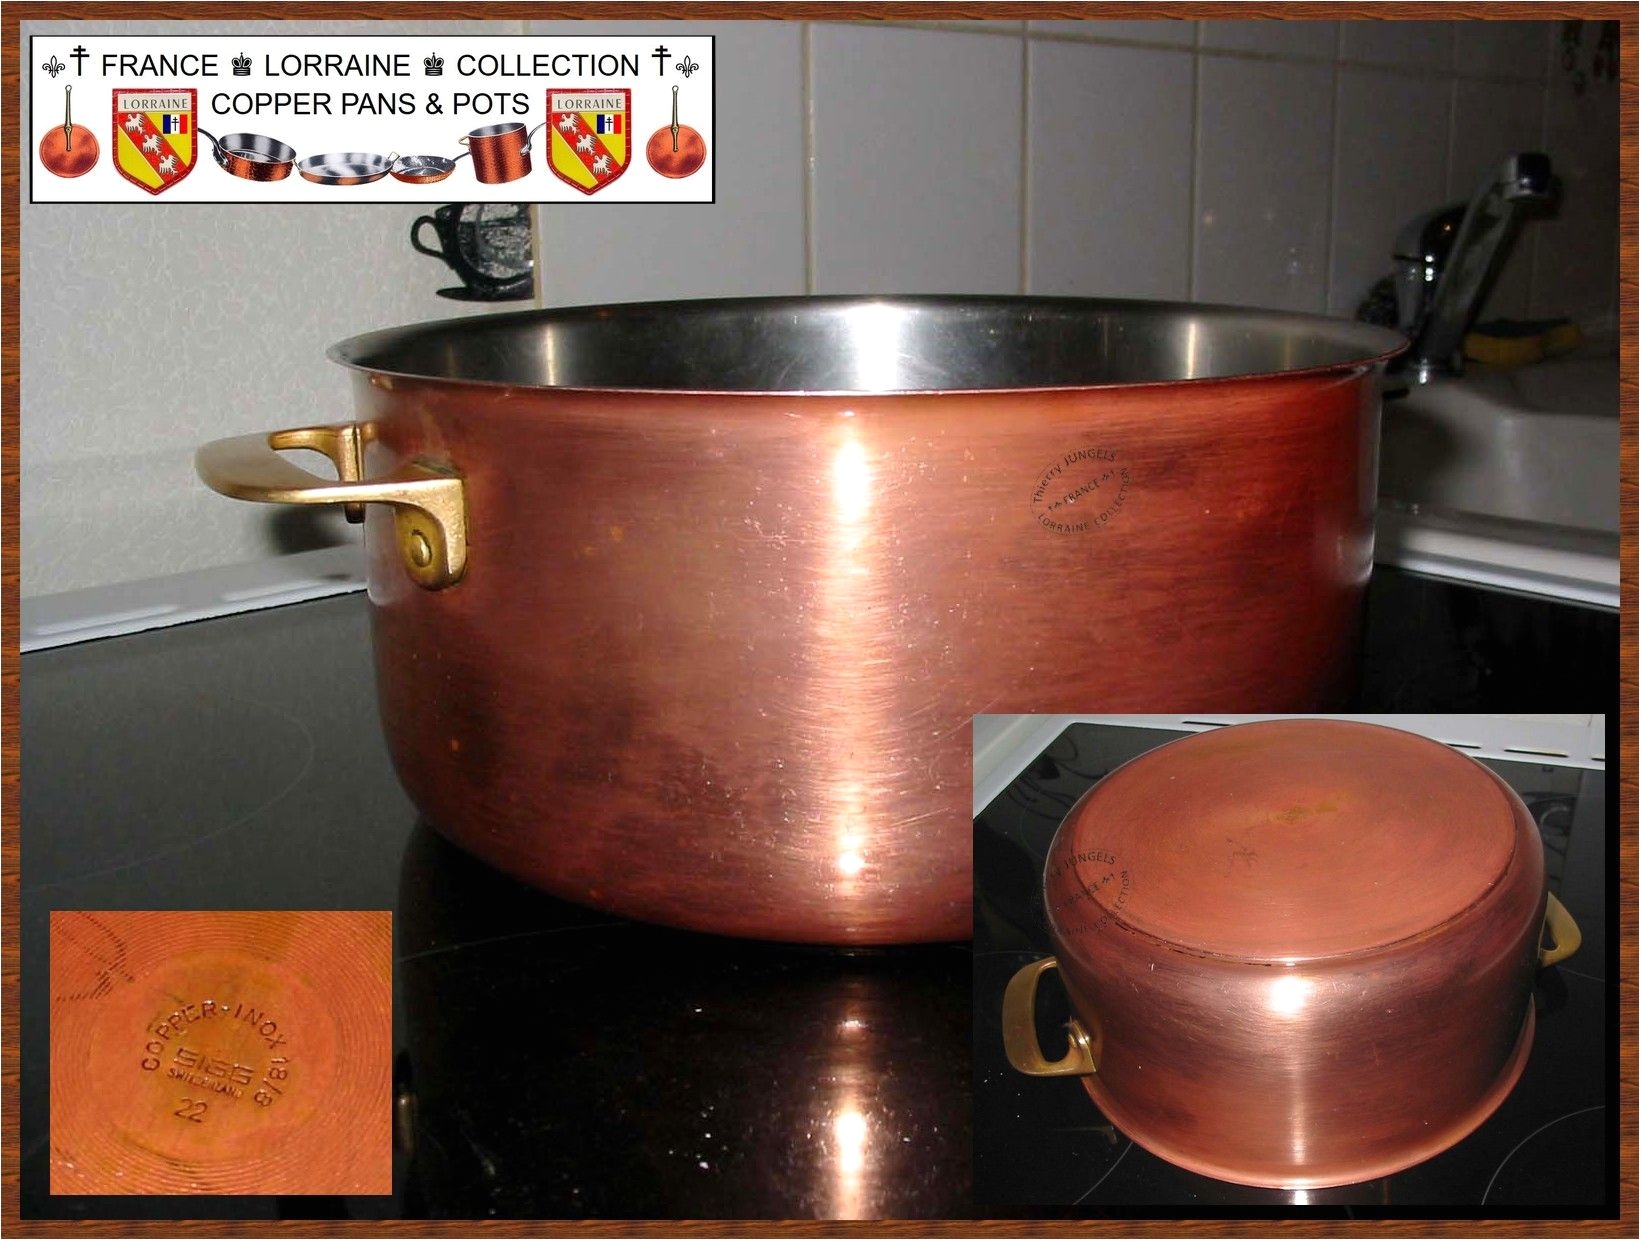 here you see a copper stock pot from sigg switzerland exterior copper and stainless steel